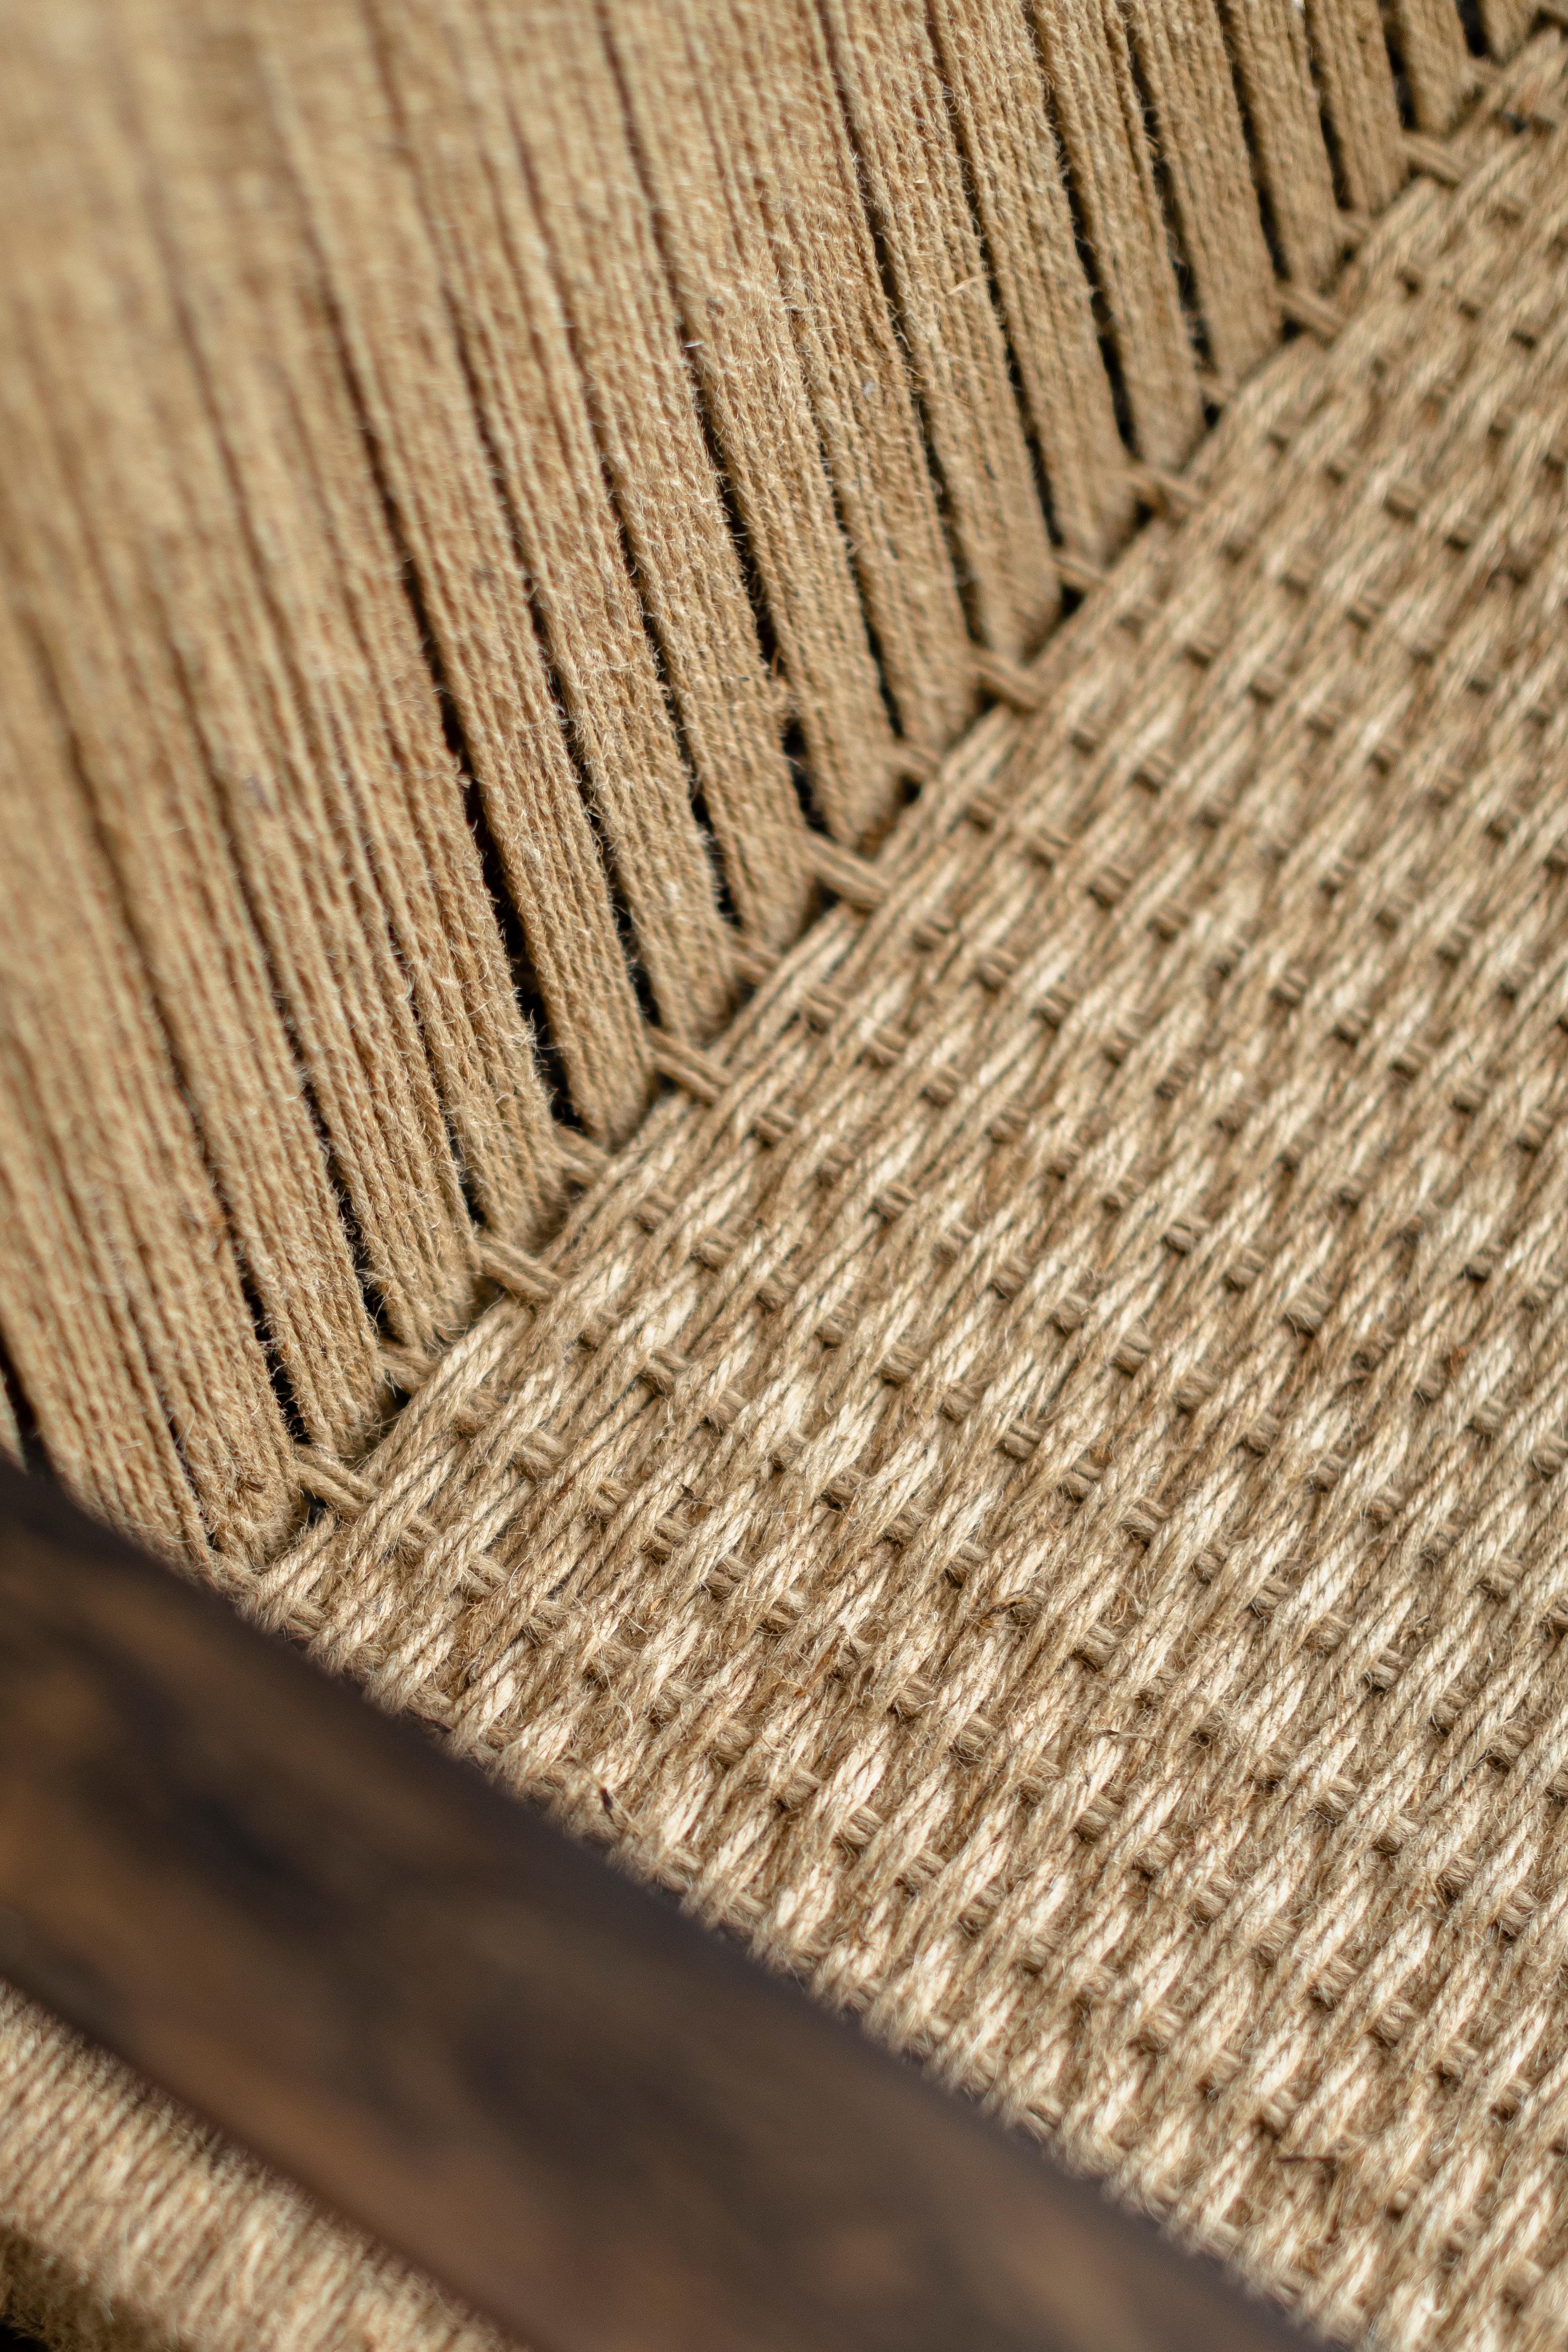 SK Collection wooden lounge chair with armrest, made from oak or tzalam wood and handwoven with papercord, jute or piola.